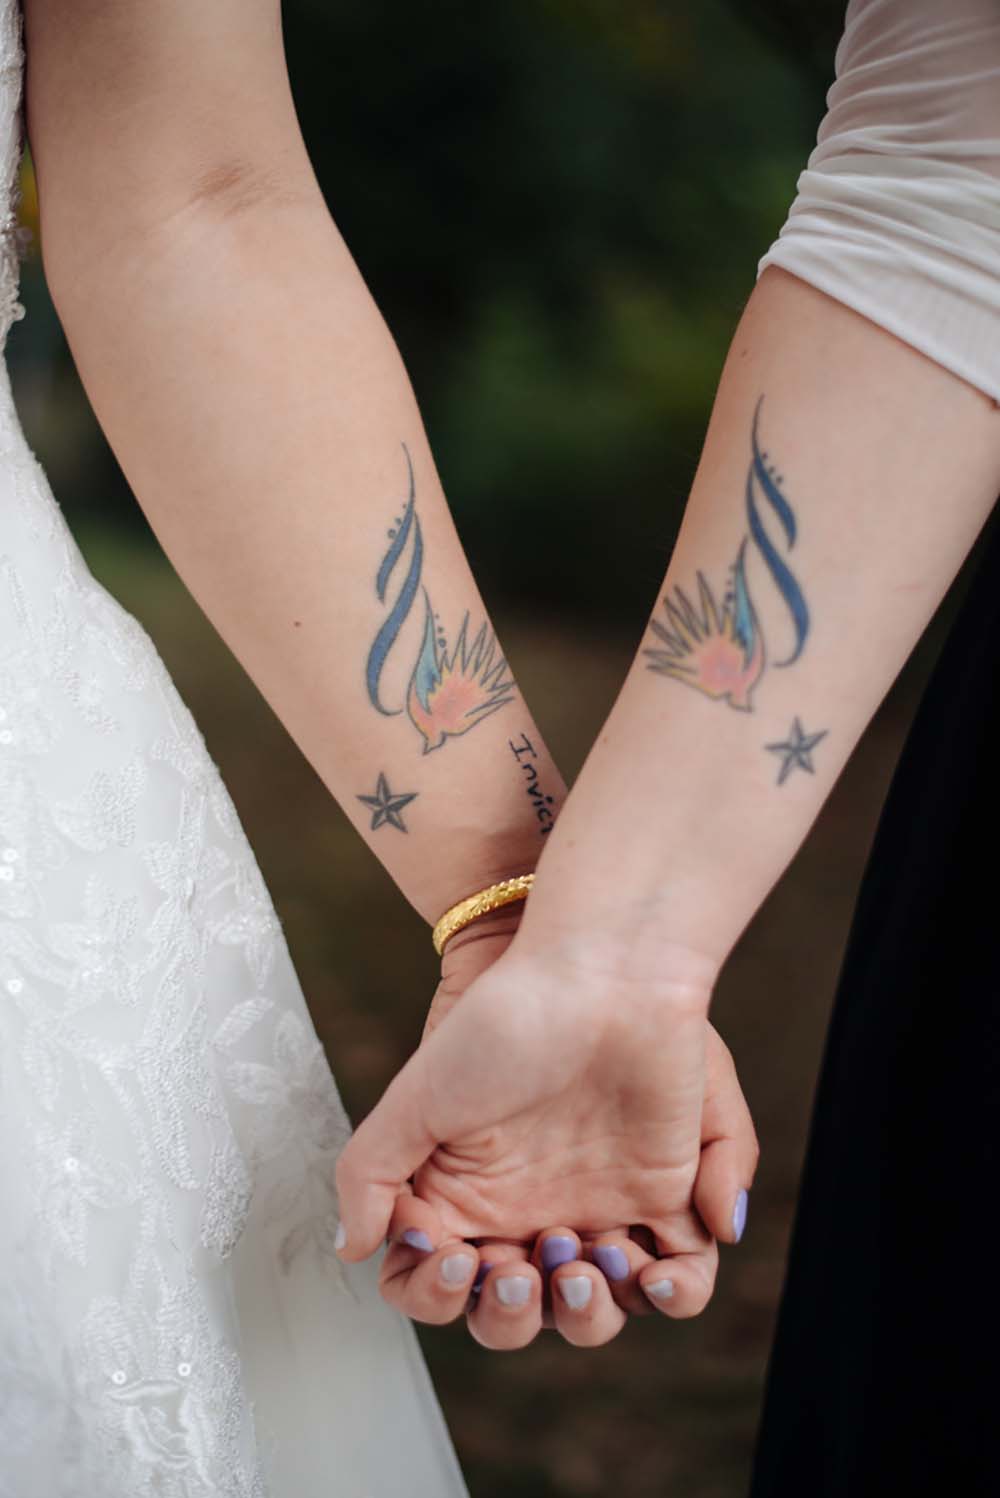 Lesbian high school sweethearts tie the knot Equally Wed